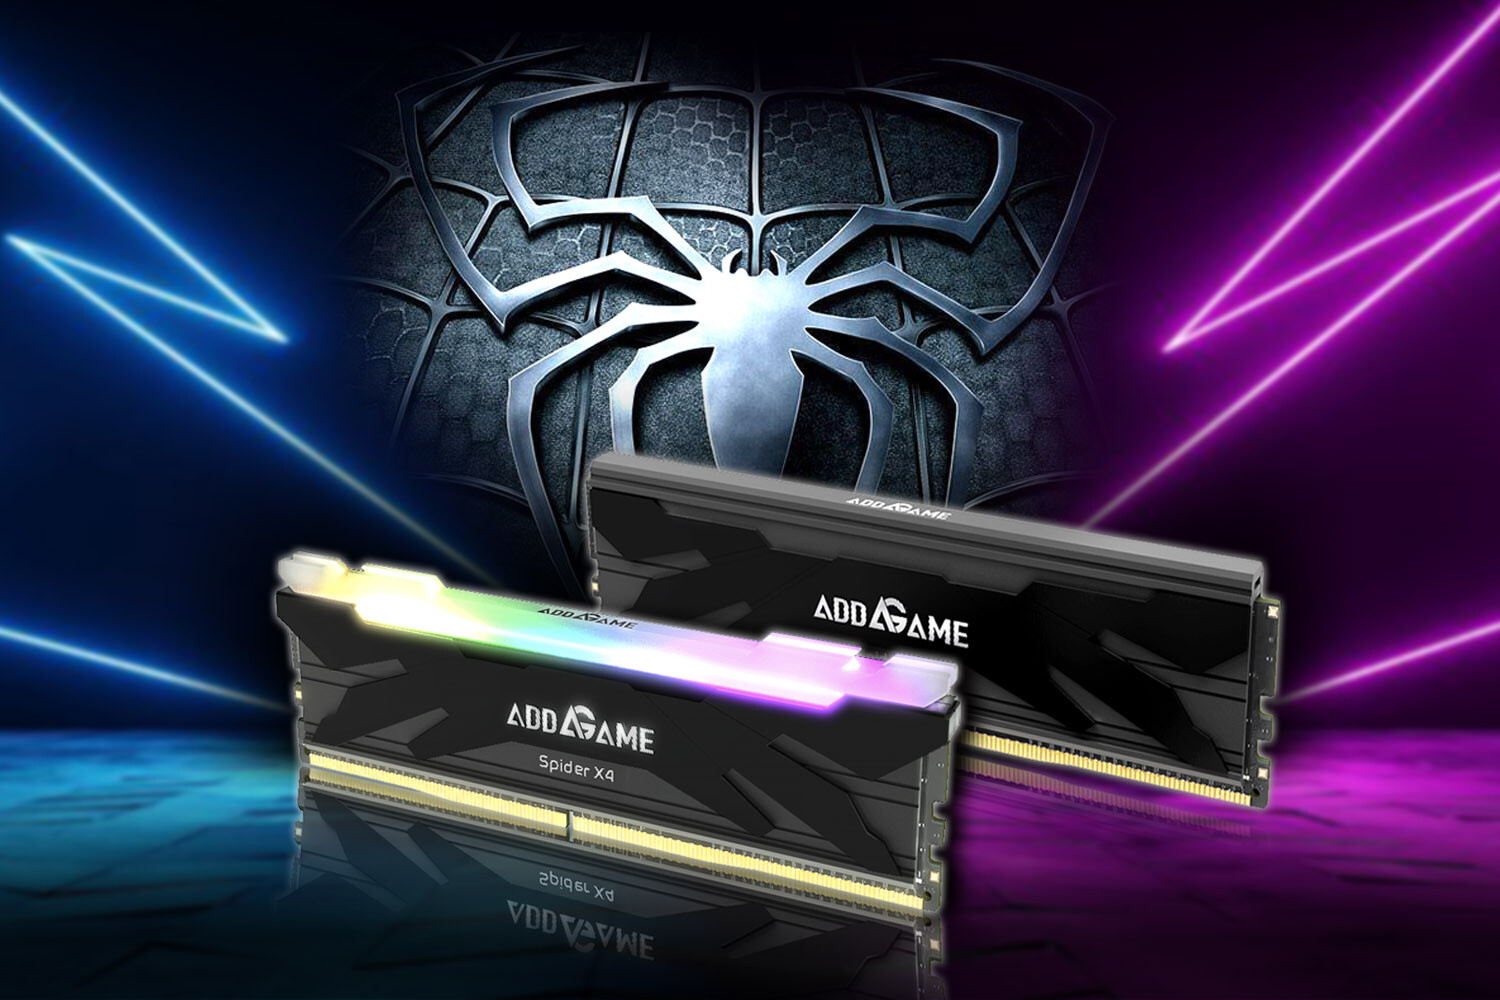 addlink Launches Spider 4 and Spider X4 Series DDR4 Memory